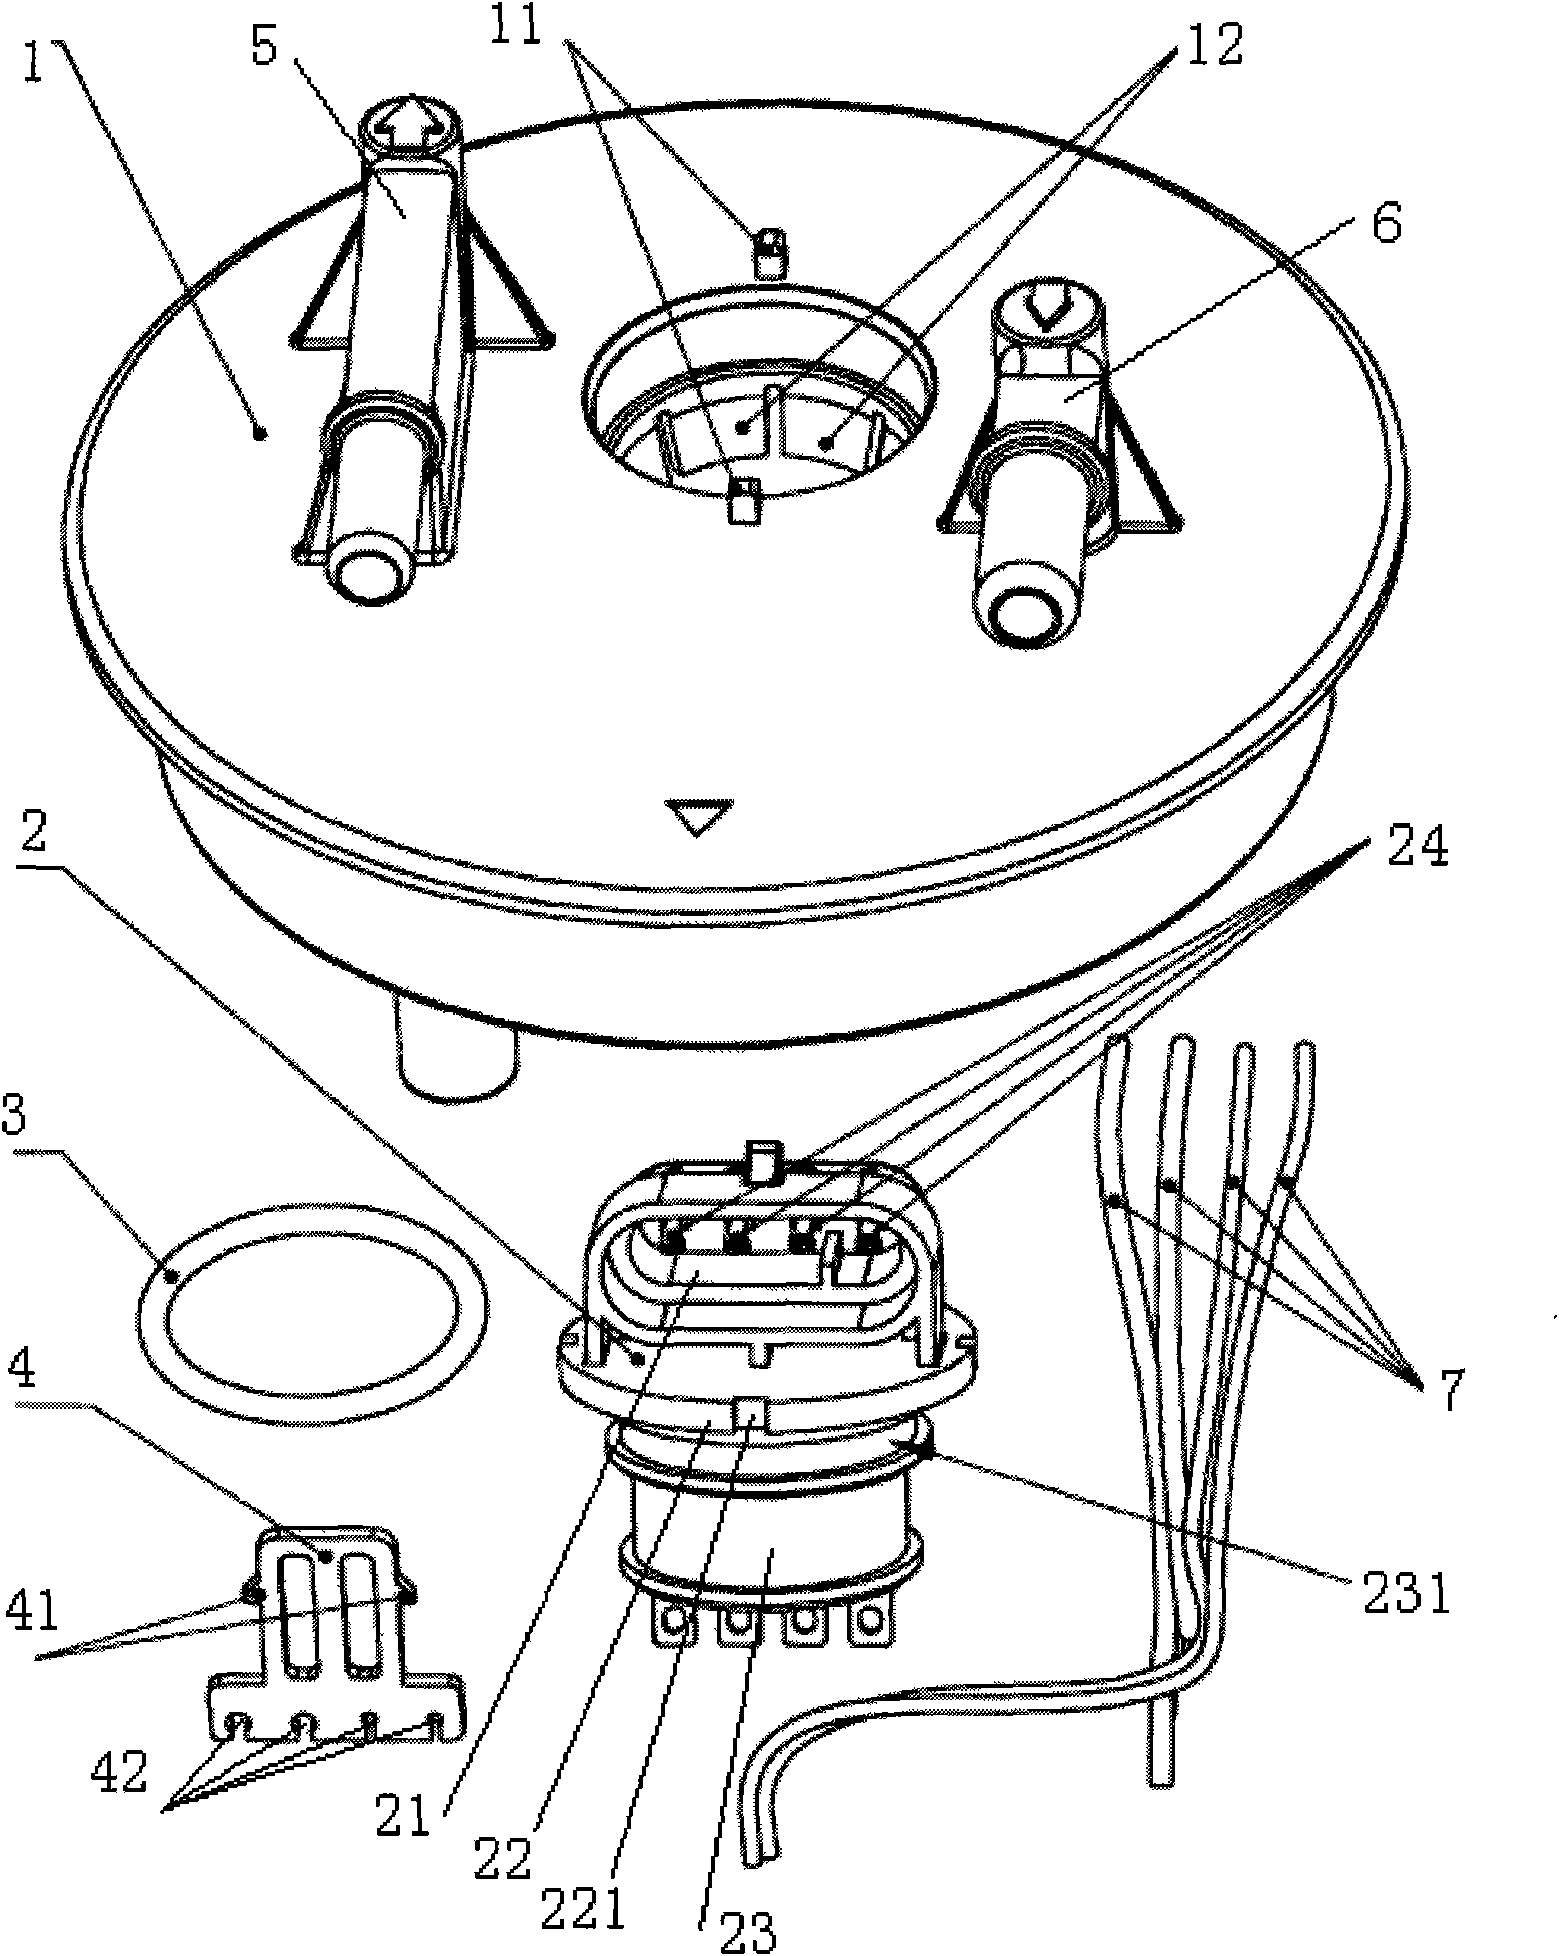 Flange assembly of oil feeding device for vehicle and electrical plug